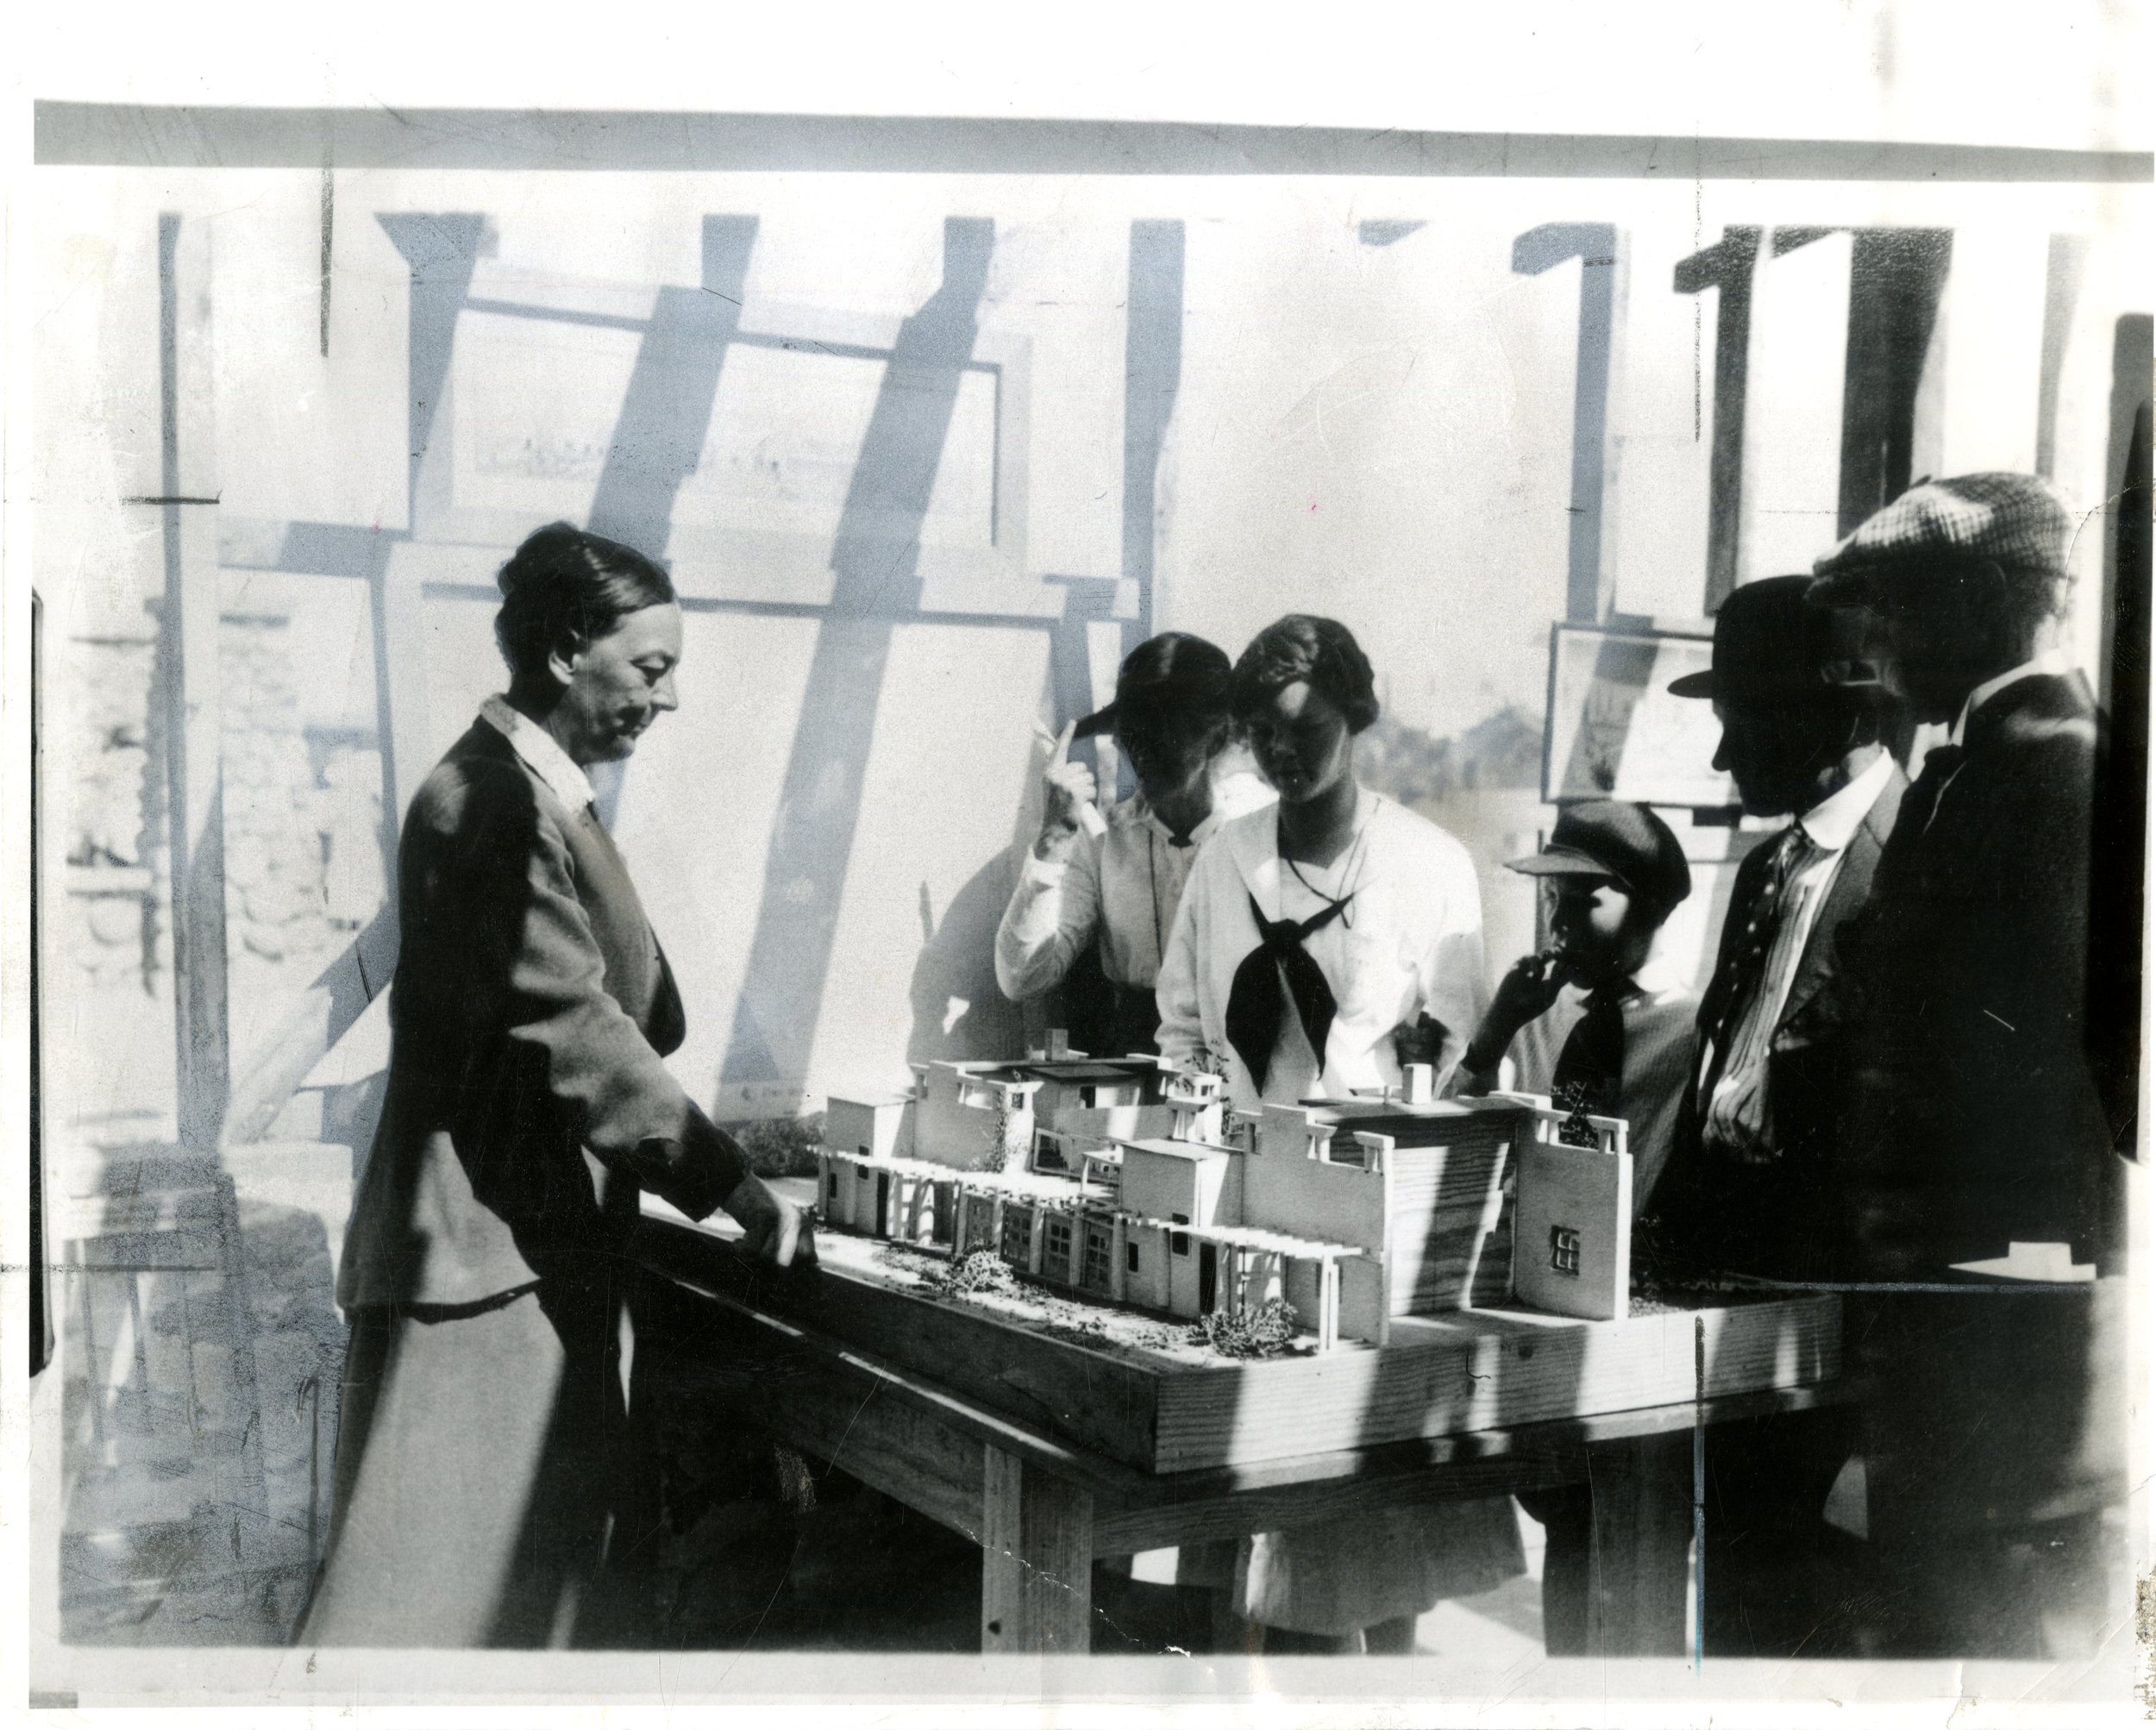  Georgia Louise Harris Brown (third from right) at work in the office of Frank Kornacker, structural engineer. Photograph by Edwards, circa late 1940s. Courtesy of the Brown family. 